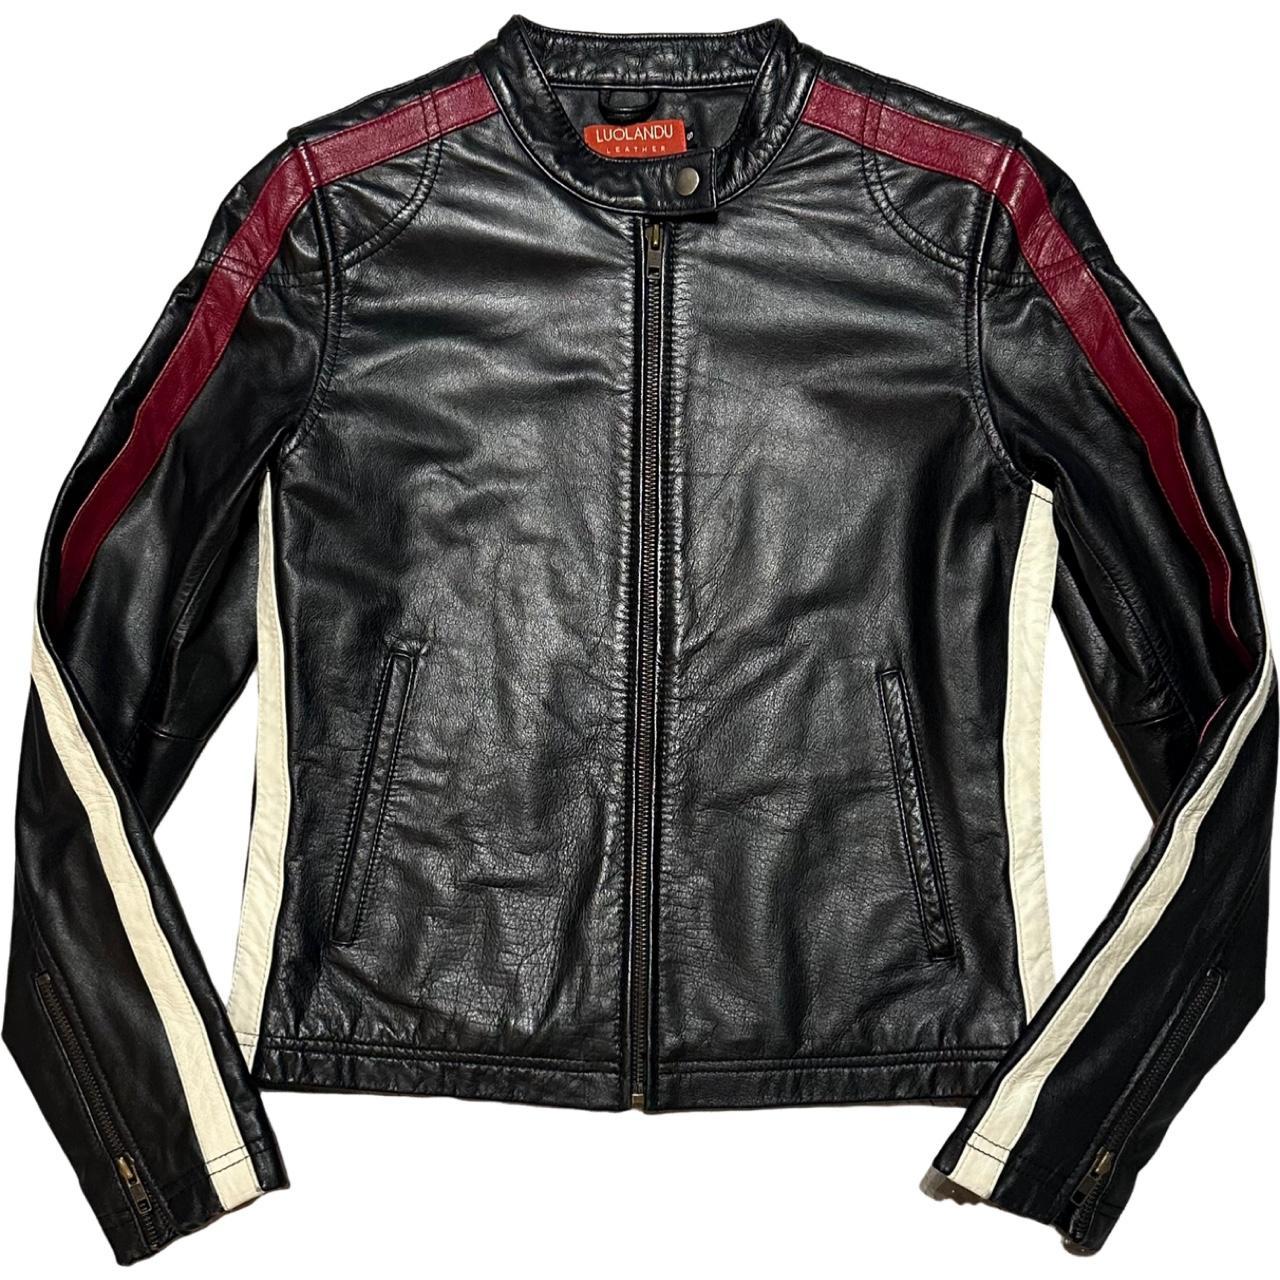 Leather Motor Cycle Jacket Withside stripe details